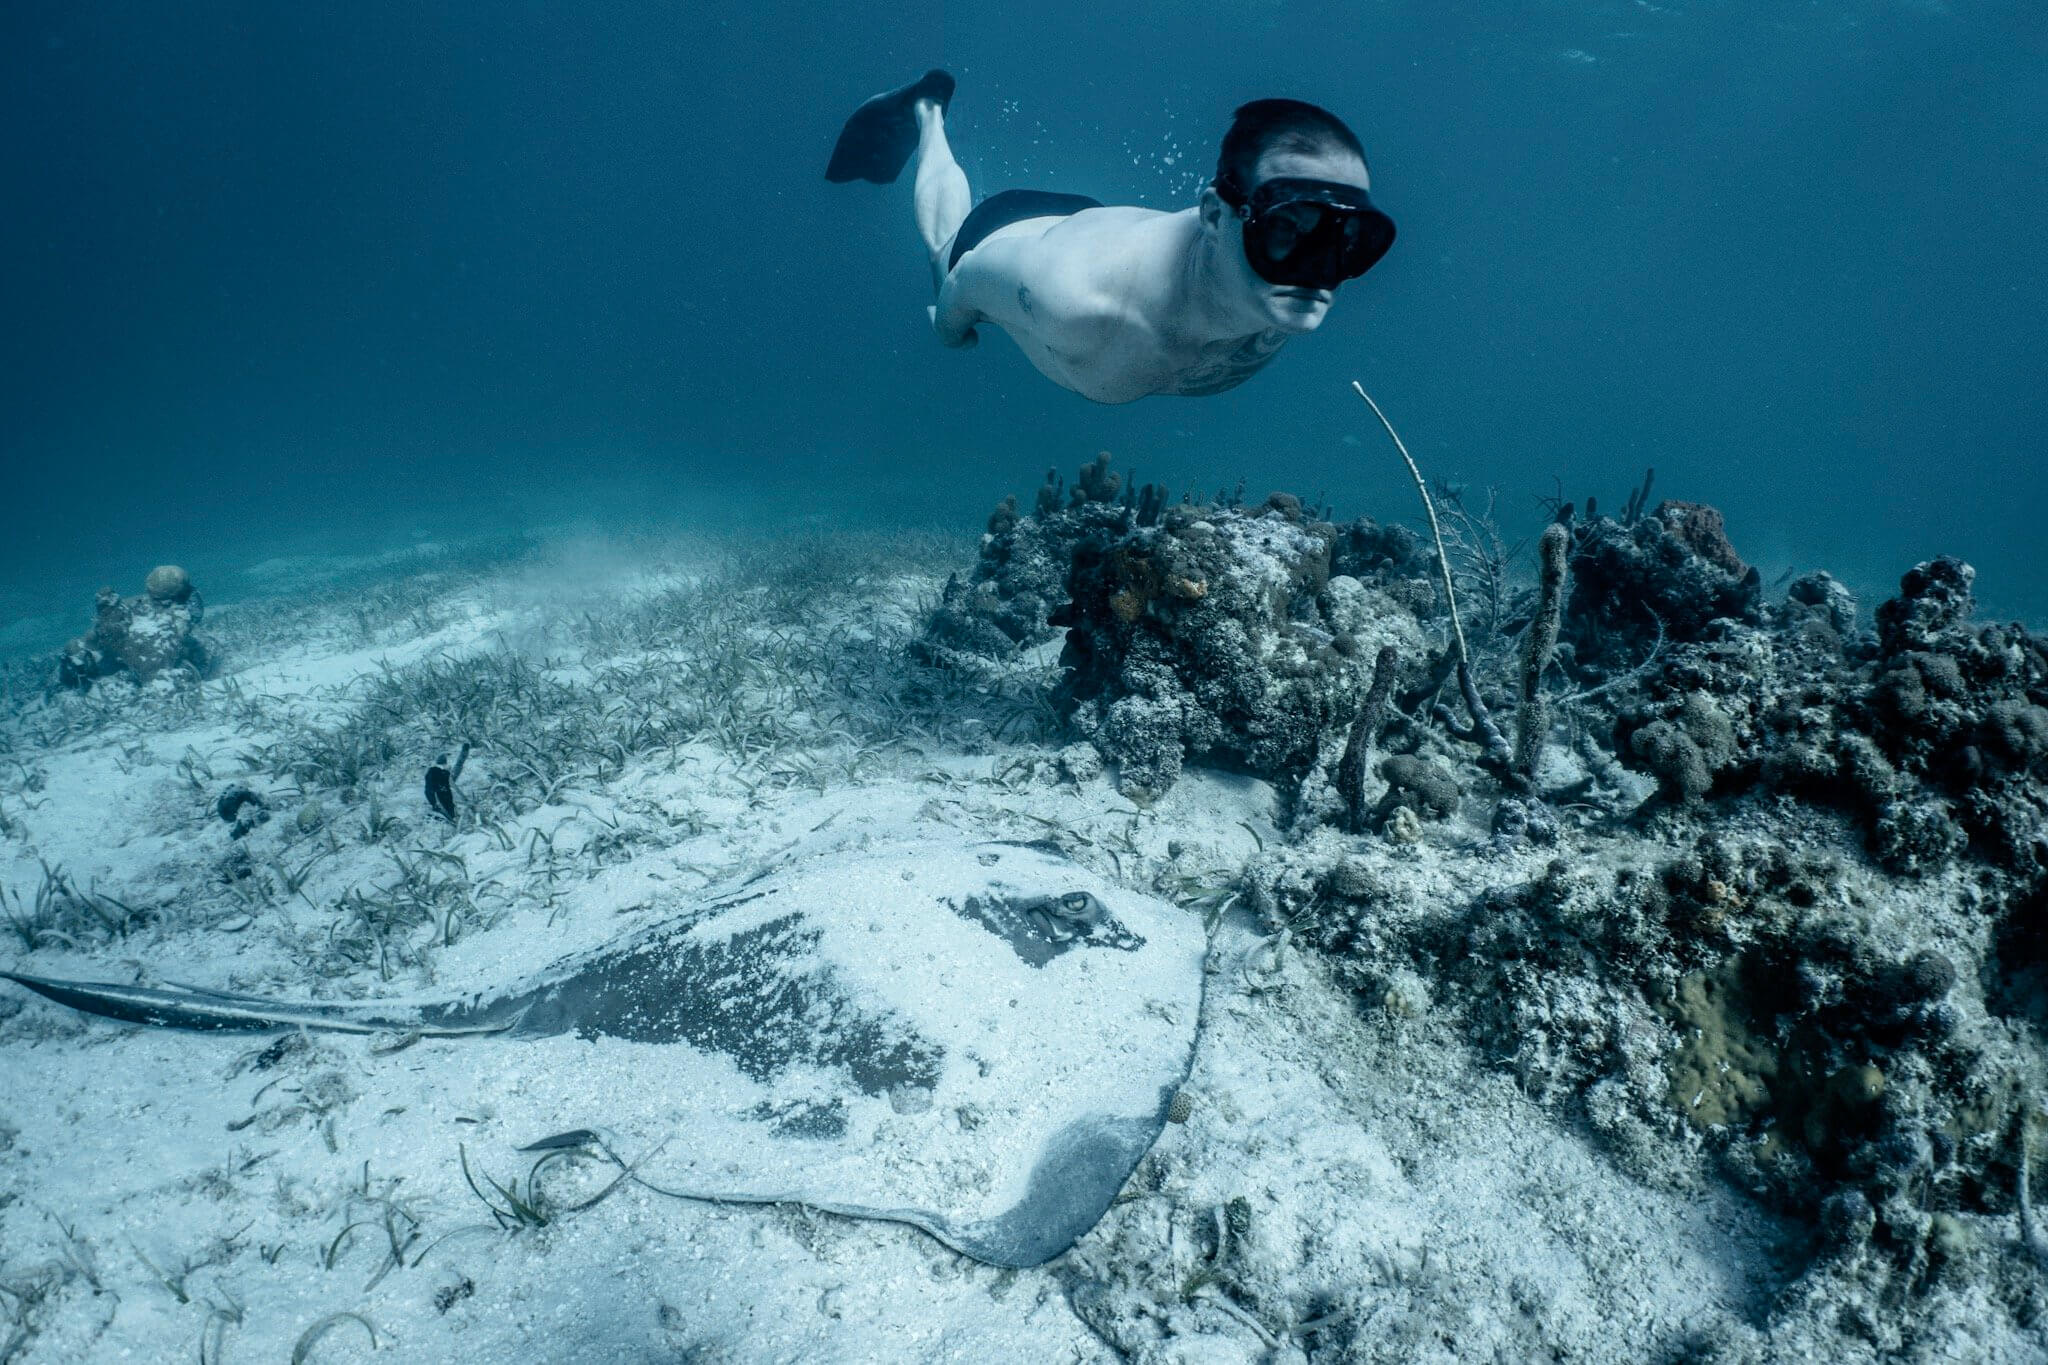 A freediver examines a southern brown stingray at Smith’s Reef in Providenciales, Turks and Caicos Islands